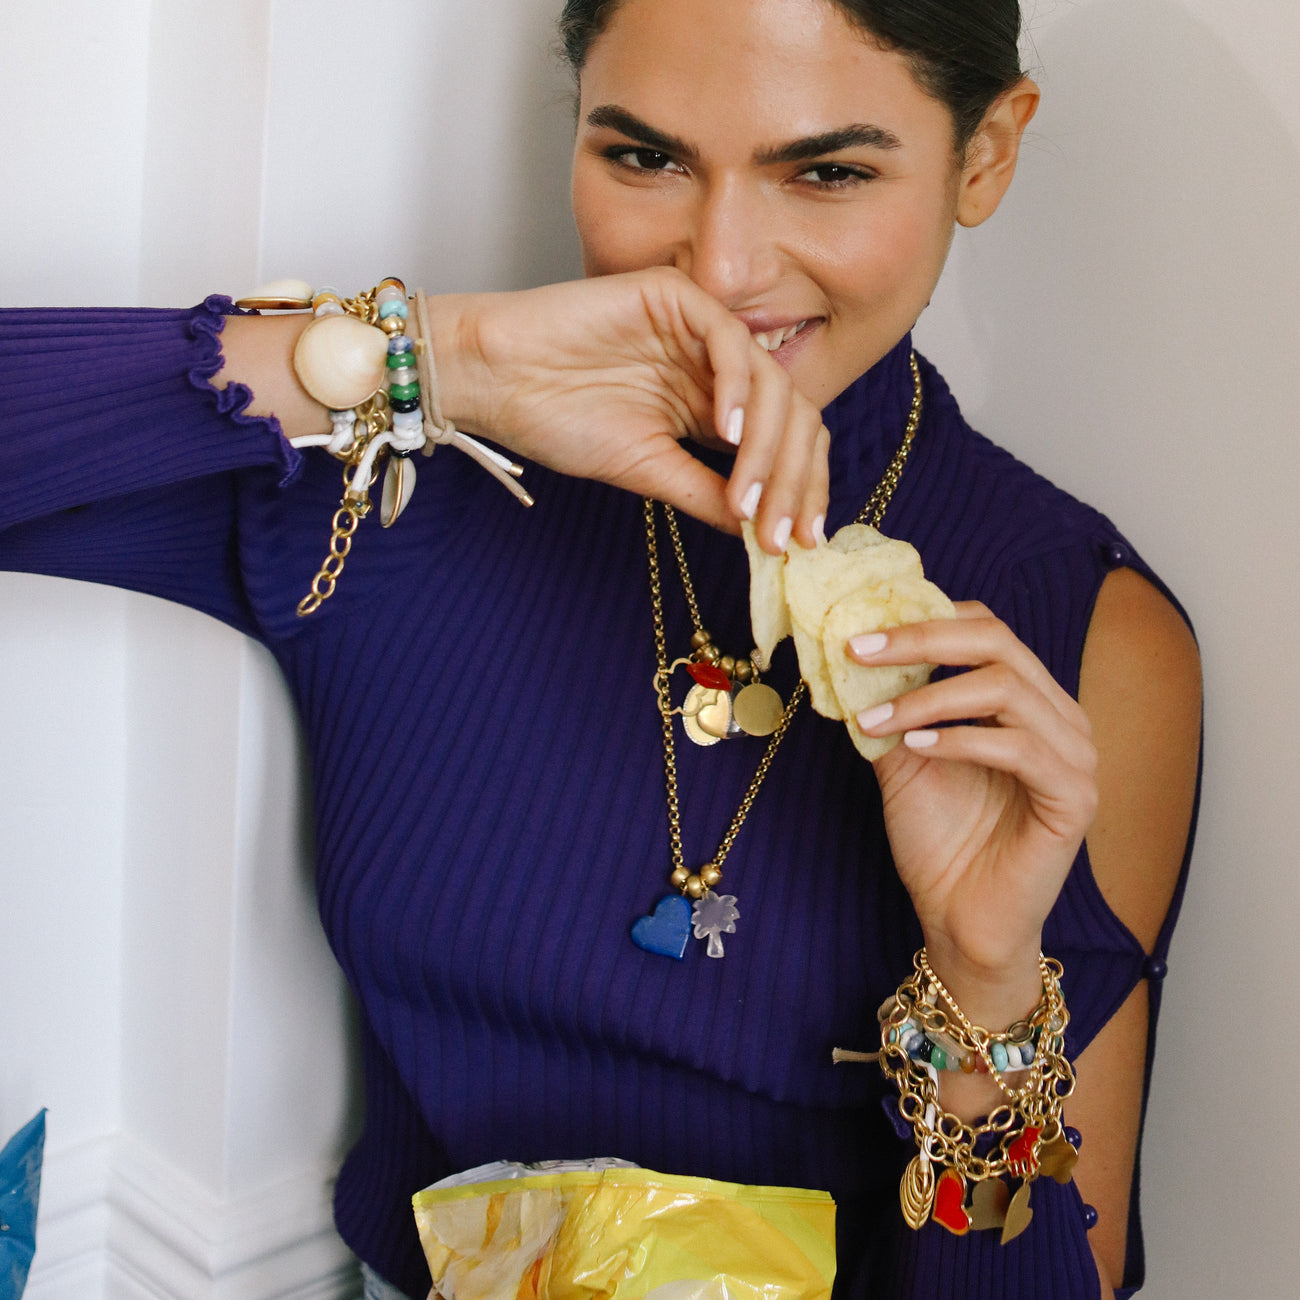 woman laughing holding potato chips with assorted bracelets on her wrists